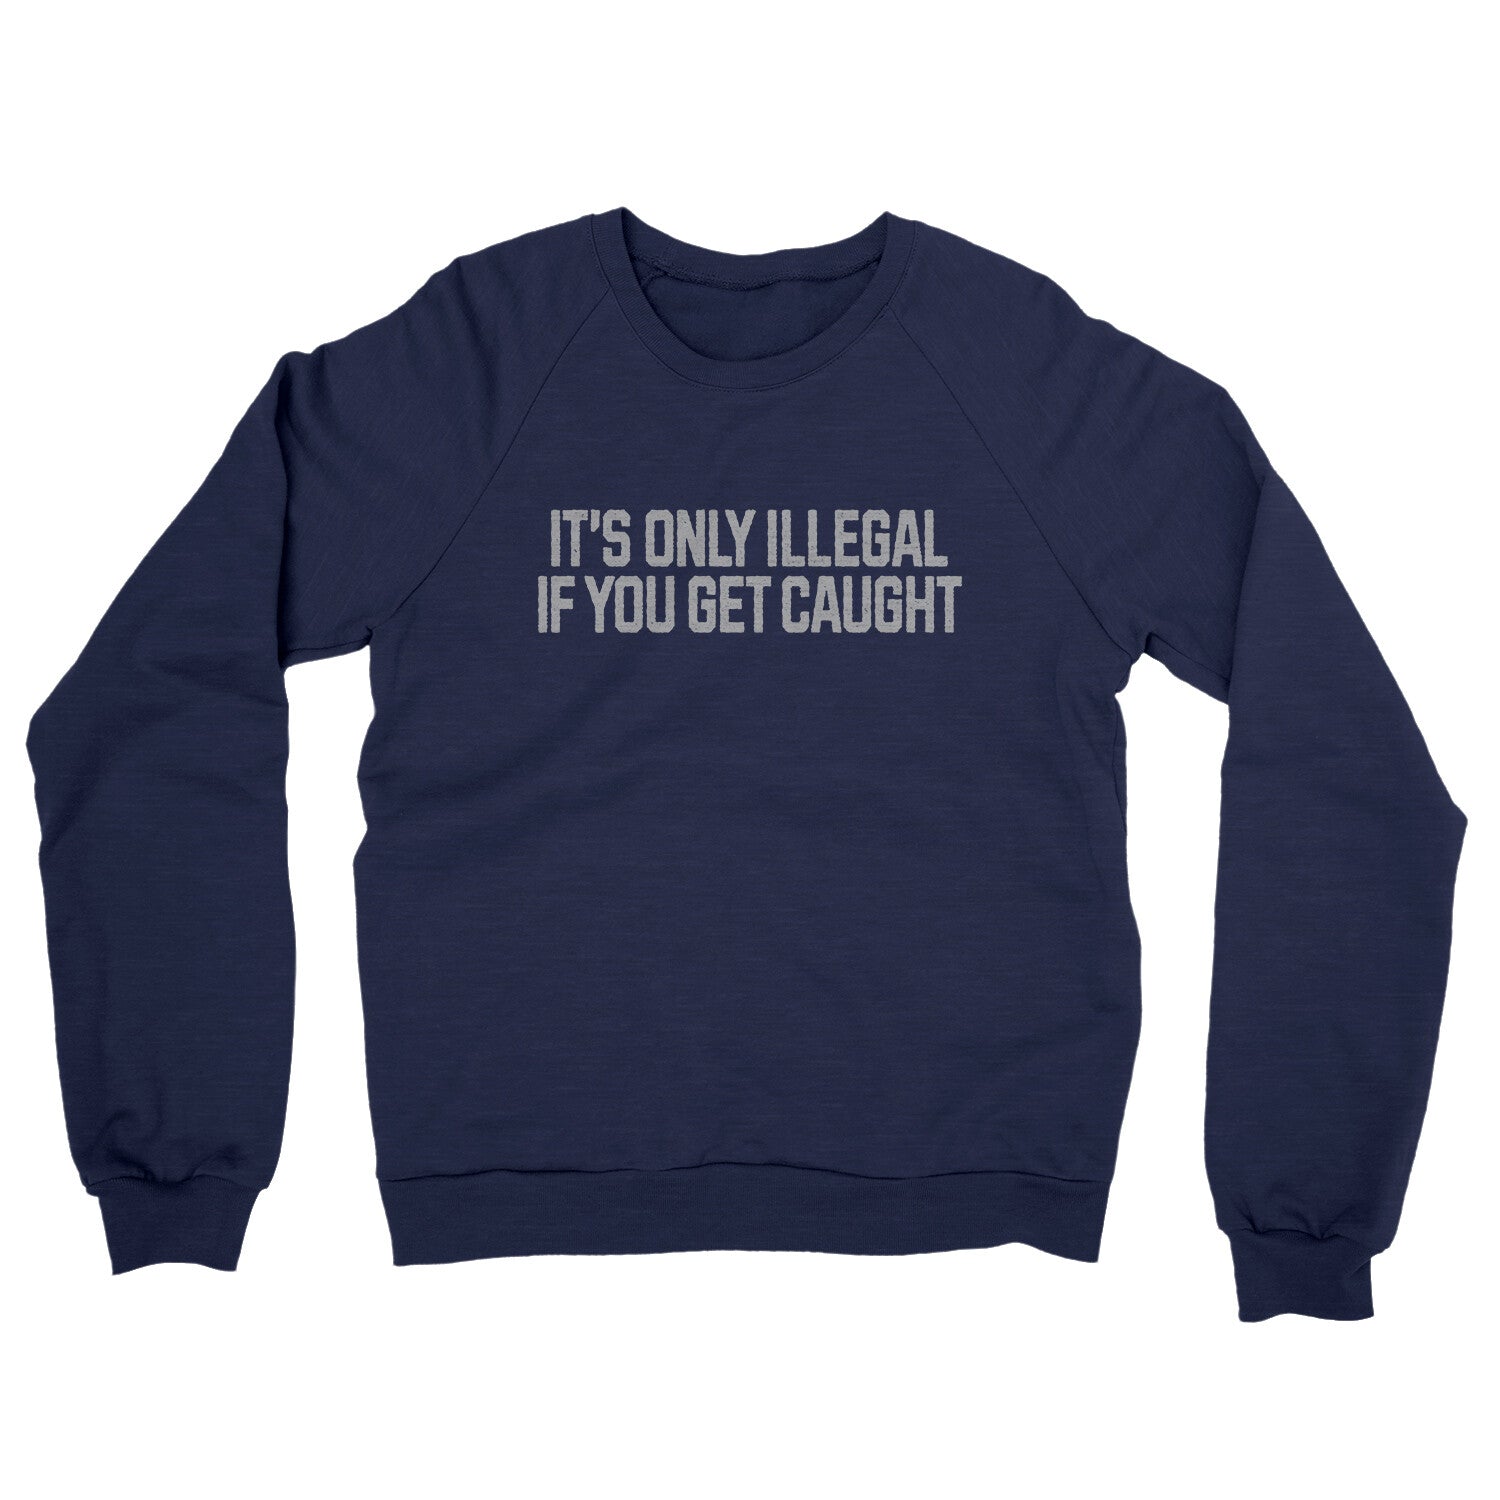 It’s Only Illegal If You Get Caught in Navy Color